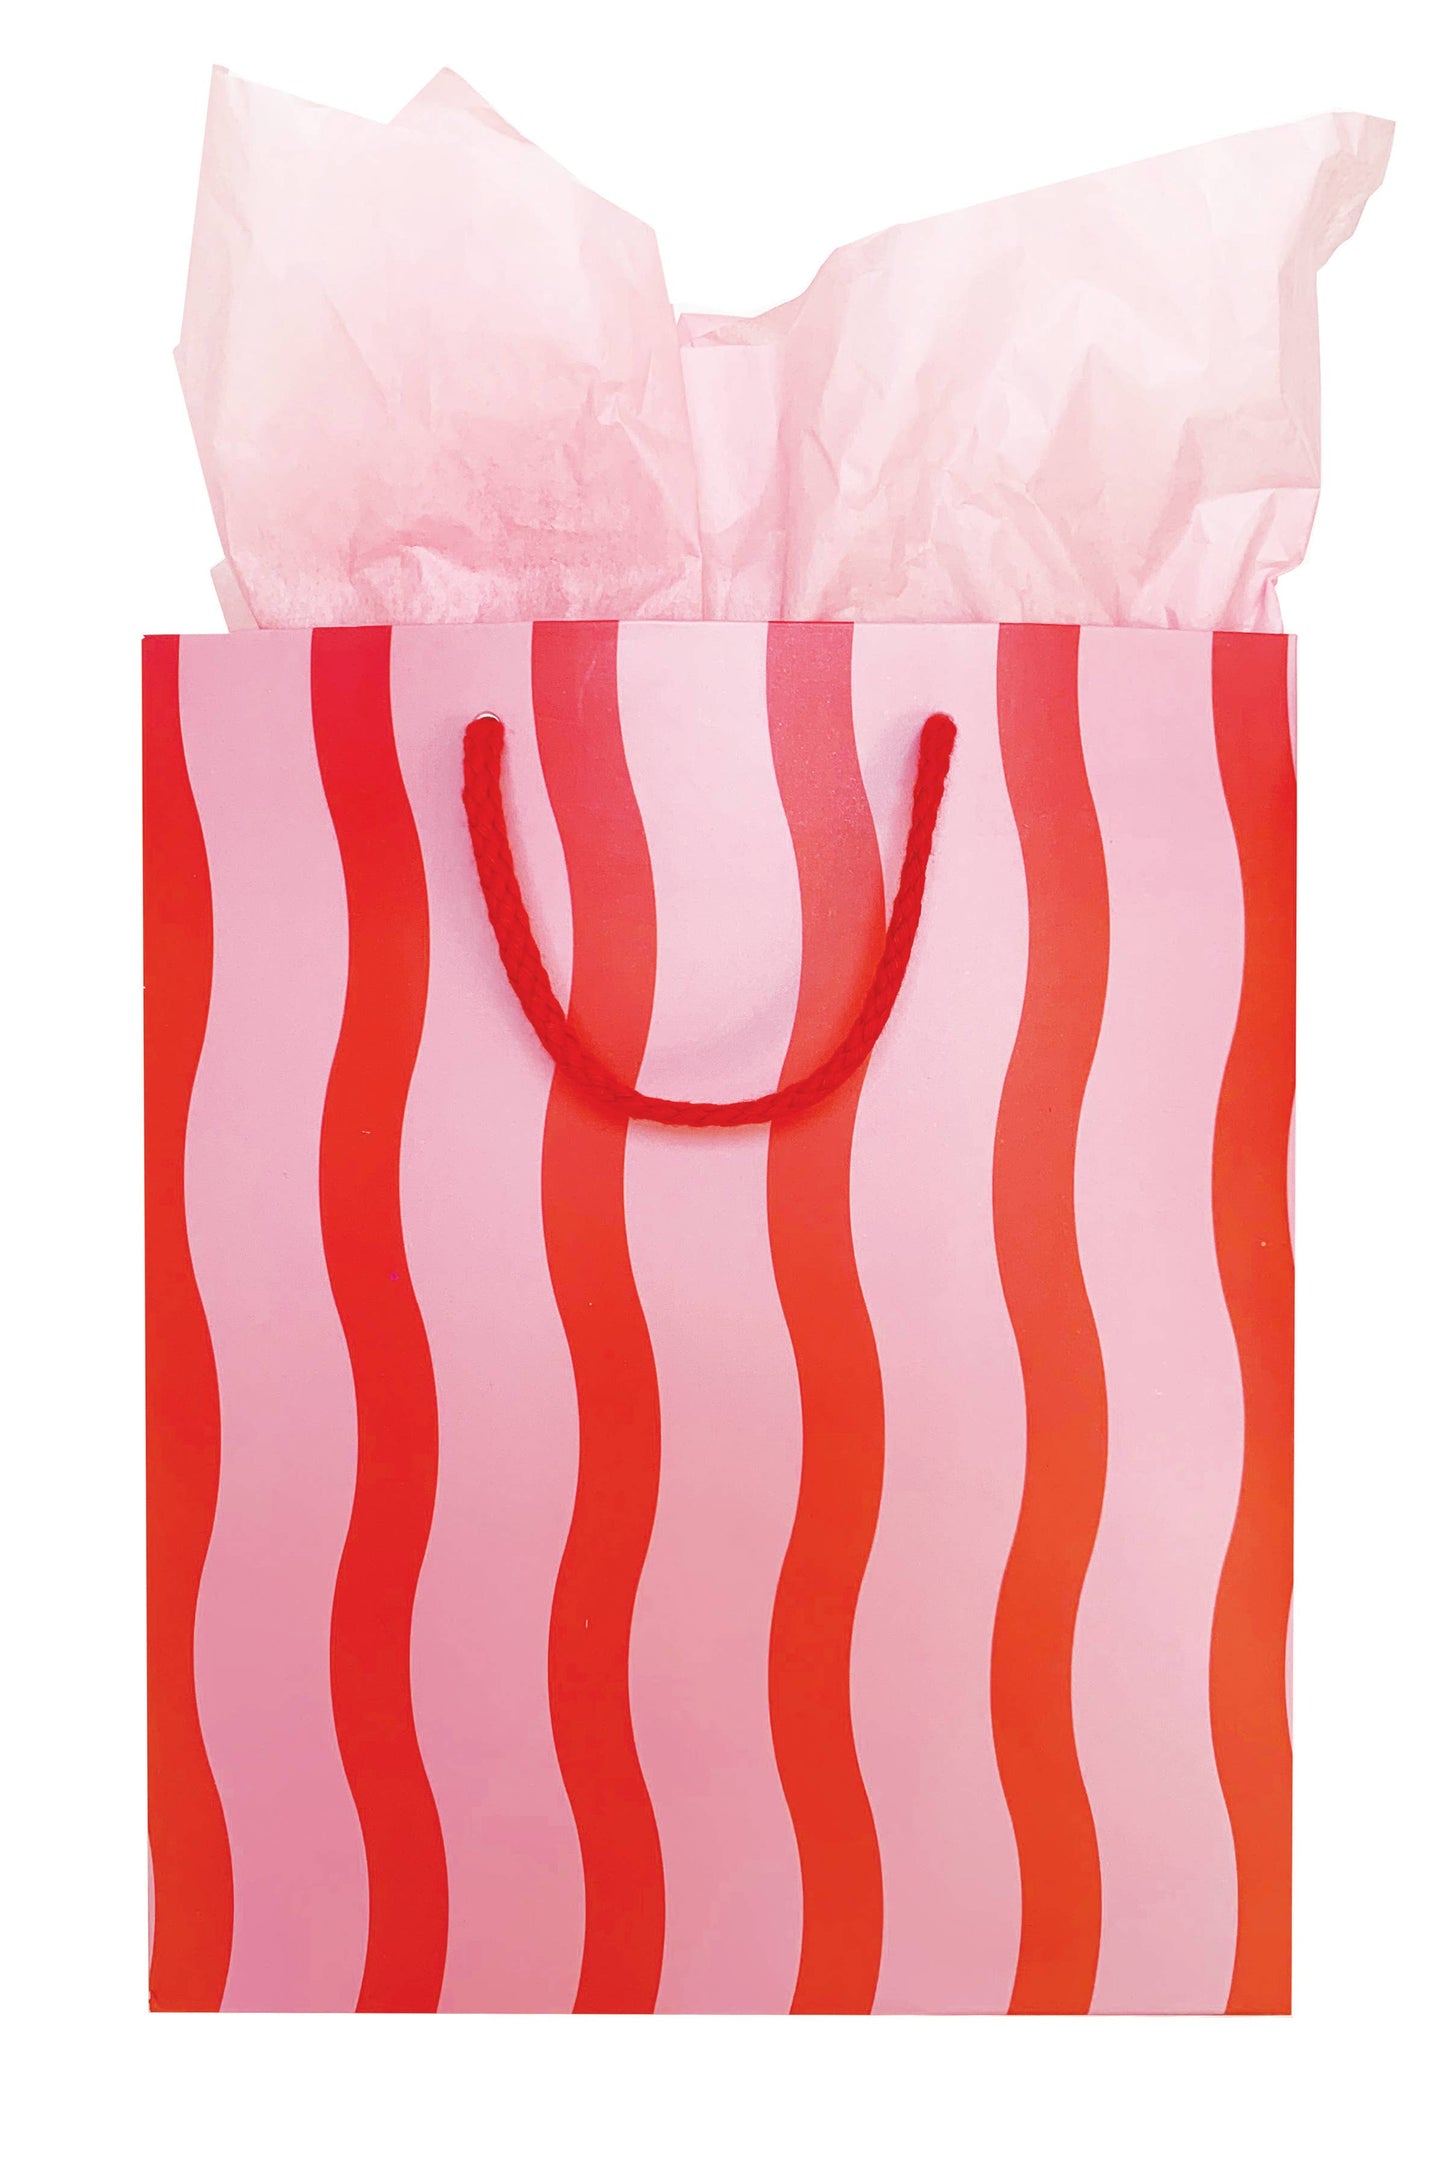 Fussy Stripe Gift Bag - The Crowd Went Wild